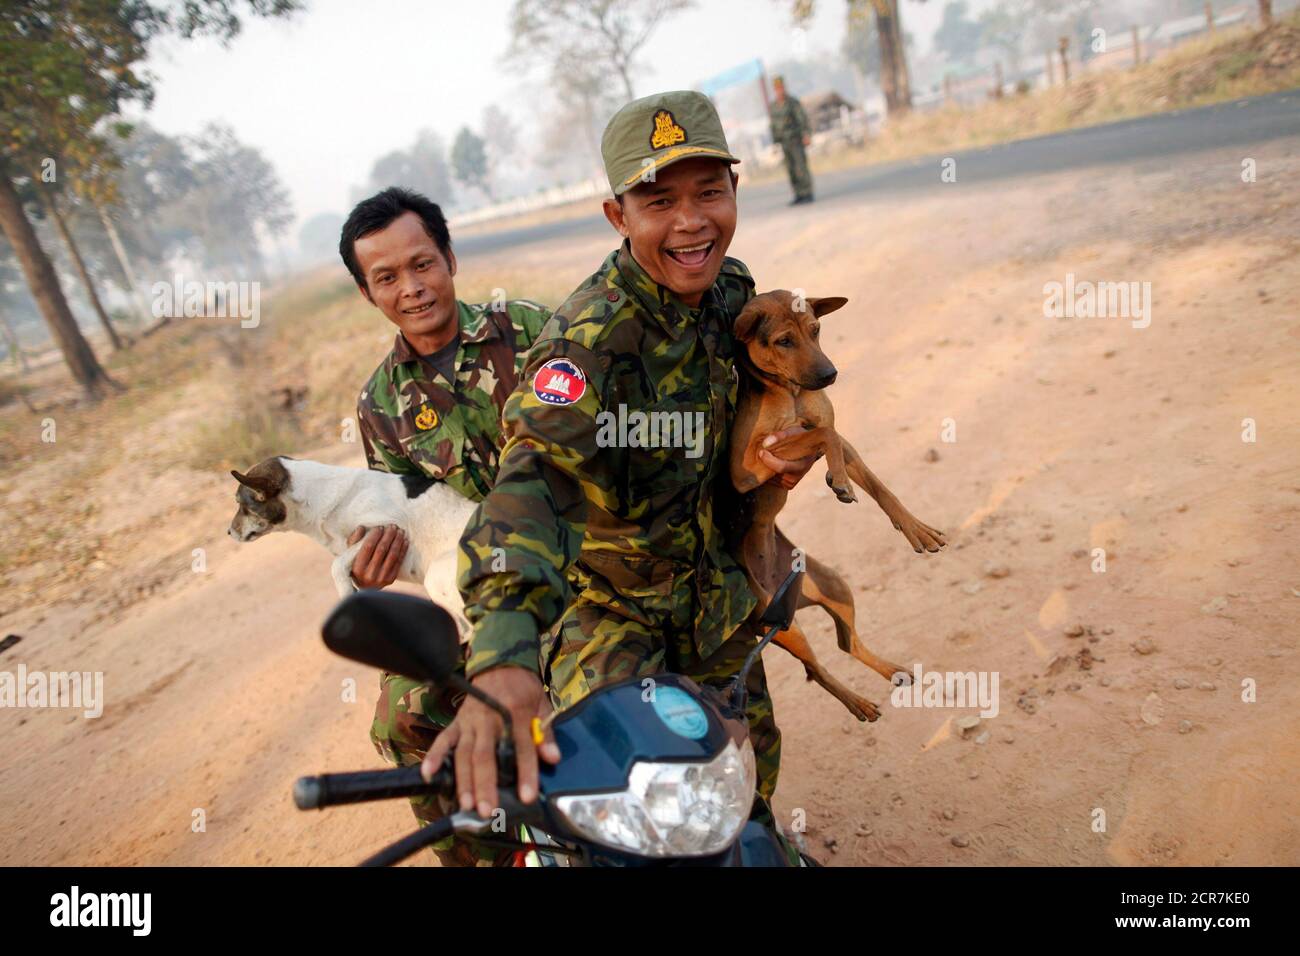 Cambodian soldiers carry dogs they found near the 11th-century Preah Vihear temple on the border between Thailand and Cambodia February 8, 2011. Thai and Cambodian troops stood on high alert on Tuesday after clashing in disputed jungle around the 900-year-old mountaintop Hindu temple, as both sides face intense regional diplomatic pressure to lay down arms.     REUTERS/Damir Sagolj (CAMBODIA - Tags: POLITICS MILITARY ANIMALS) Stock Photo